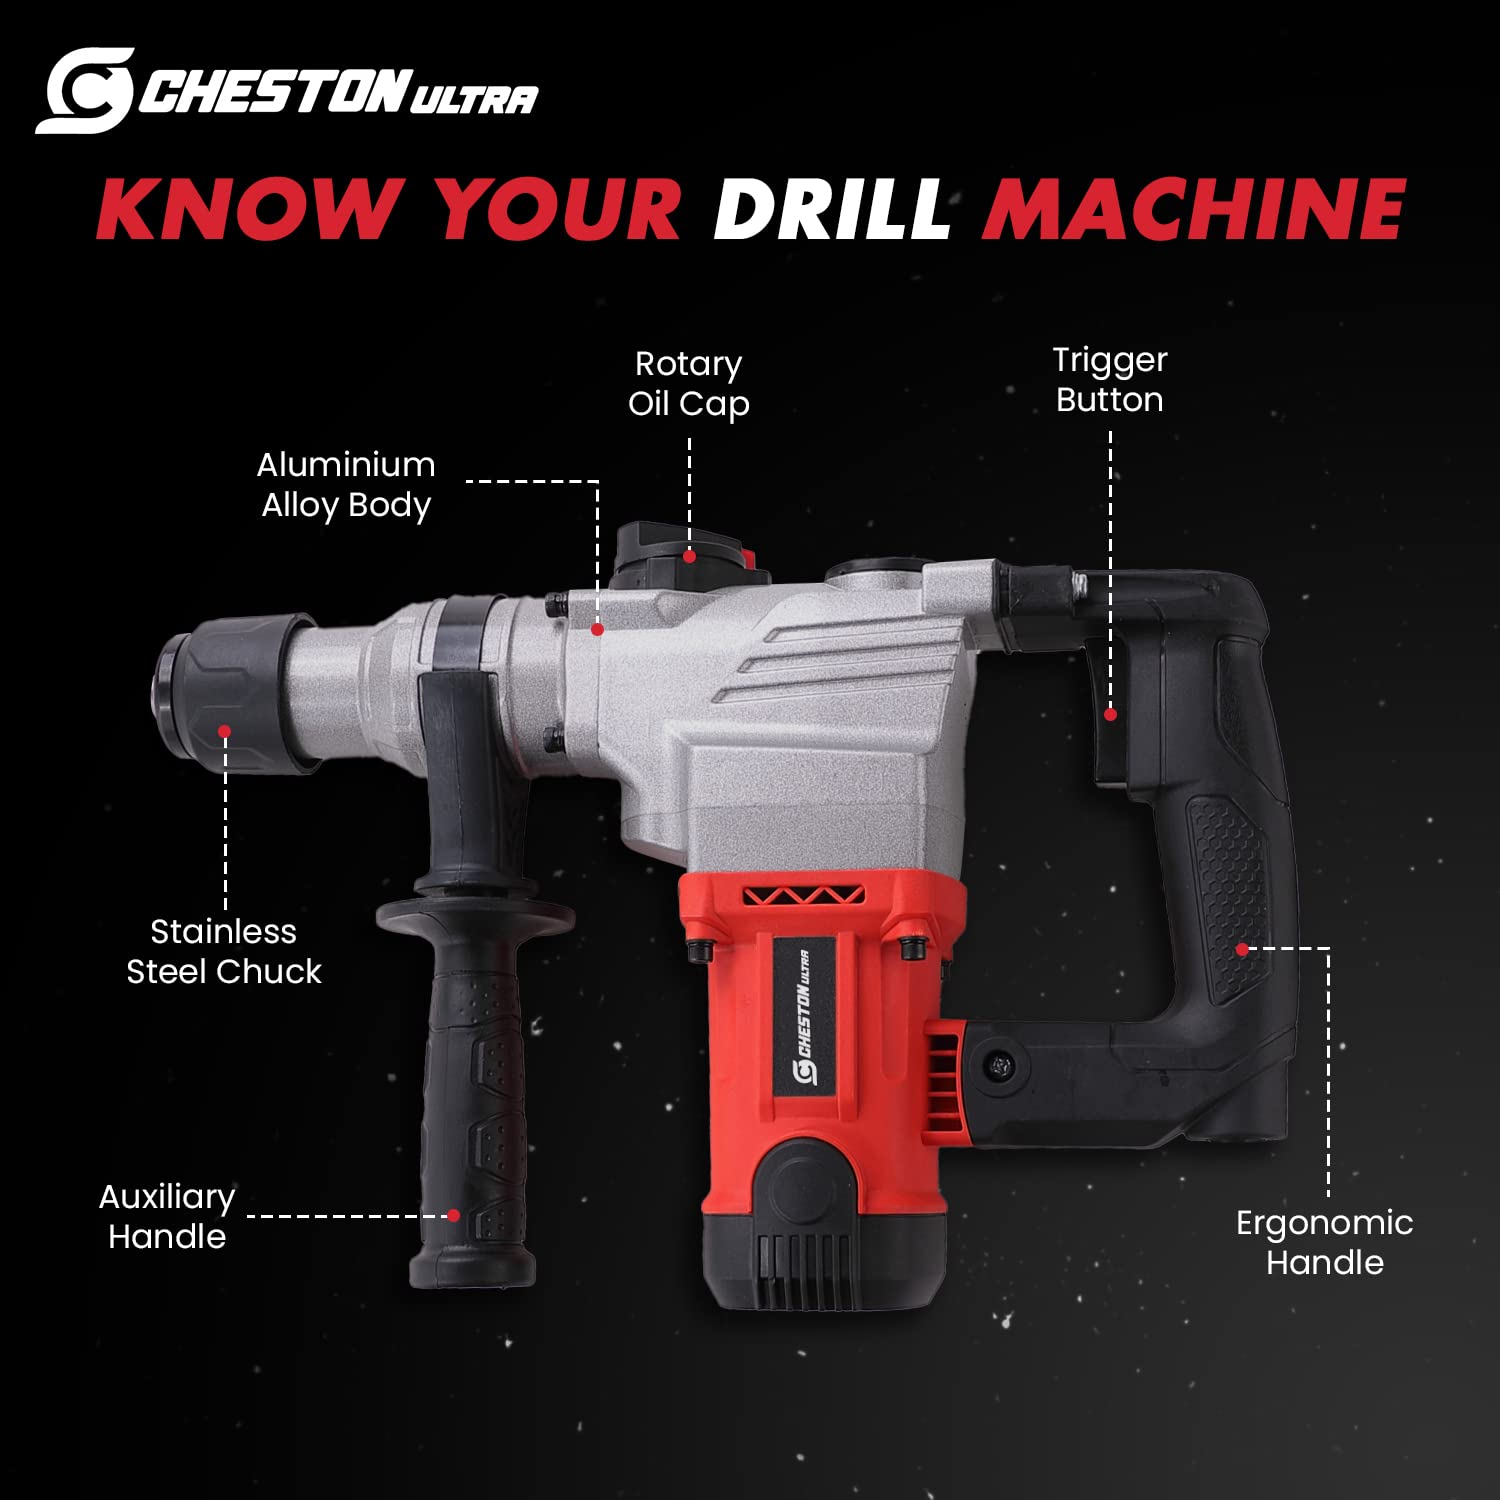 Cheston Ultra 26mm Core Drill Rotary Hammer 1200W | 900RPM For Drilling & Demolition Task With Accessories 3 Drill Bits & 2 Chisels